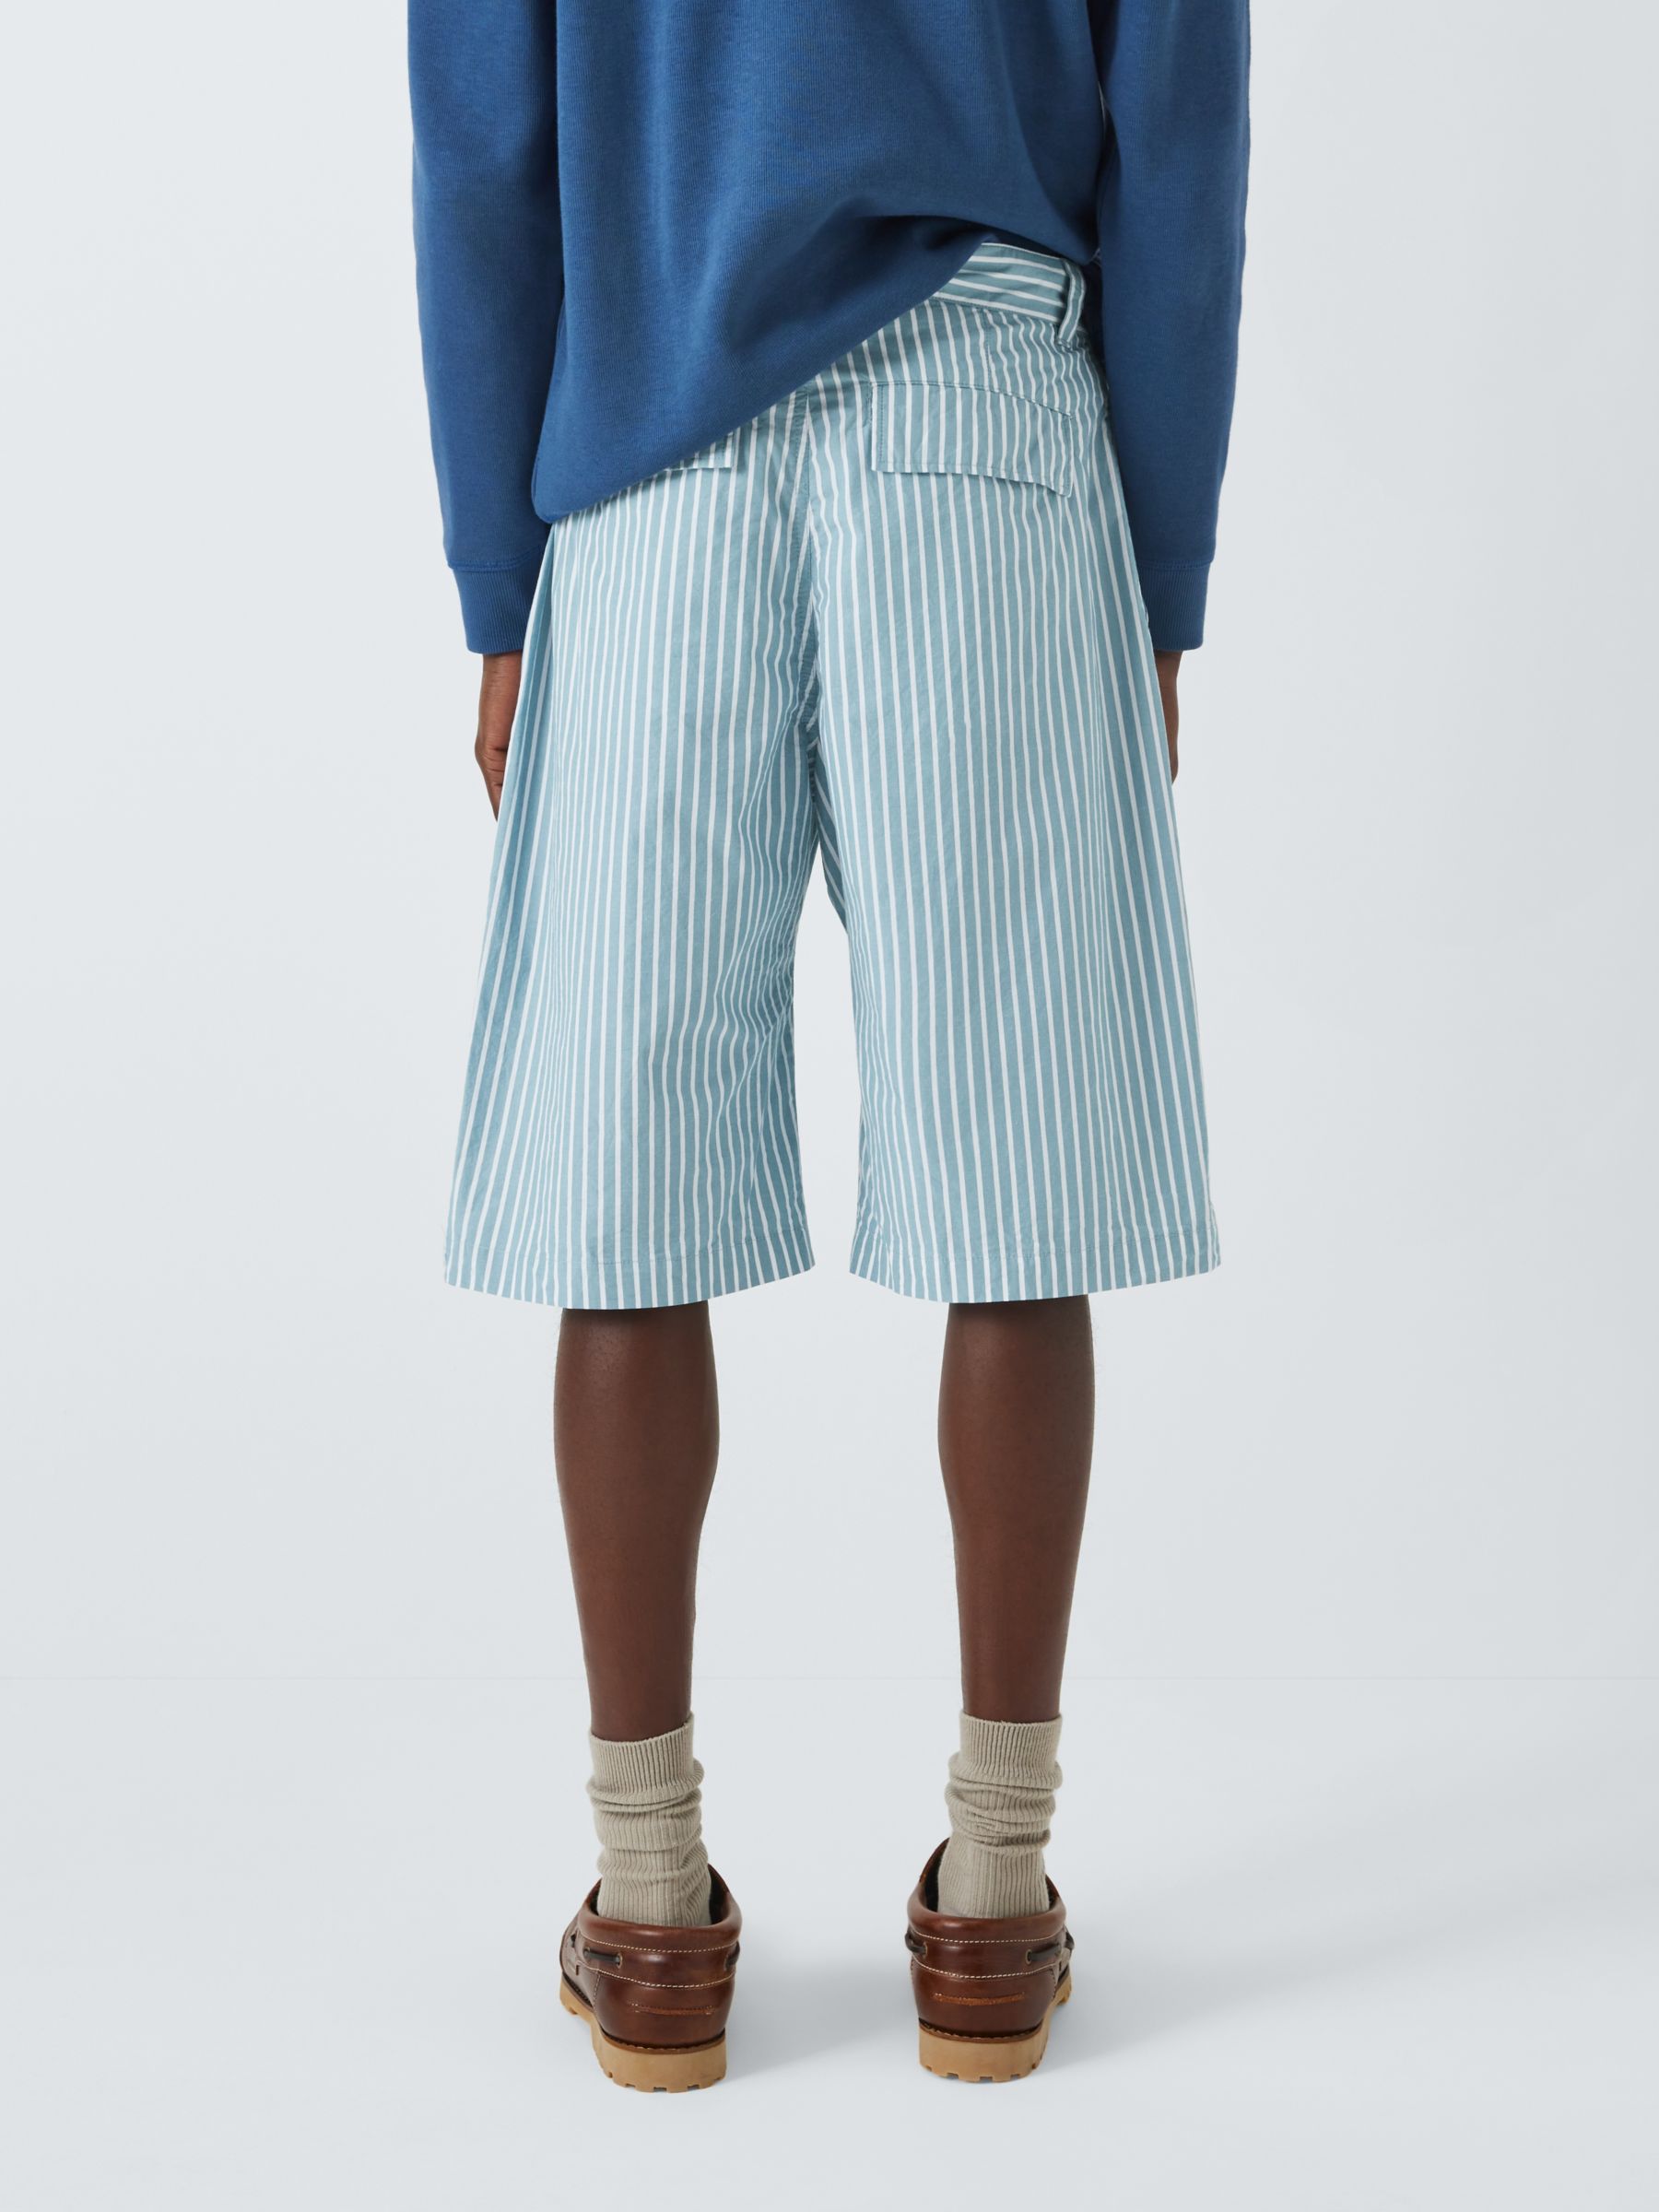 Buy Armor Lux Raye Heritage Striped Shorts, Blue/White Online at johnlewis.com